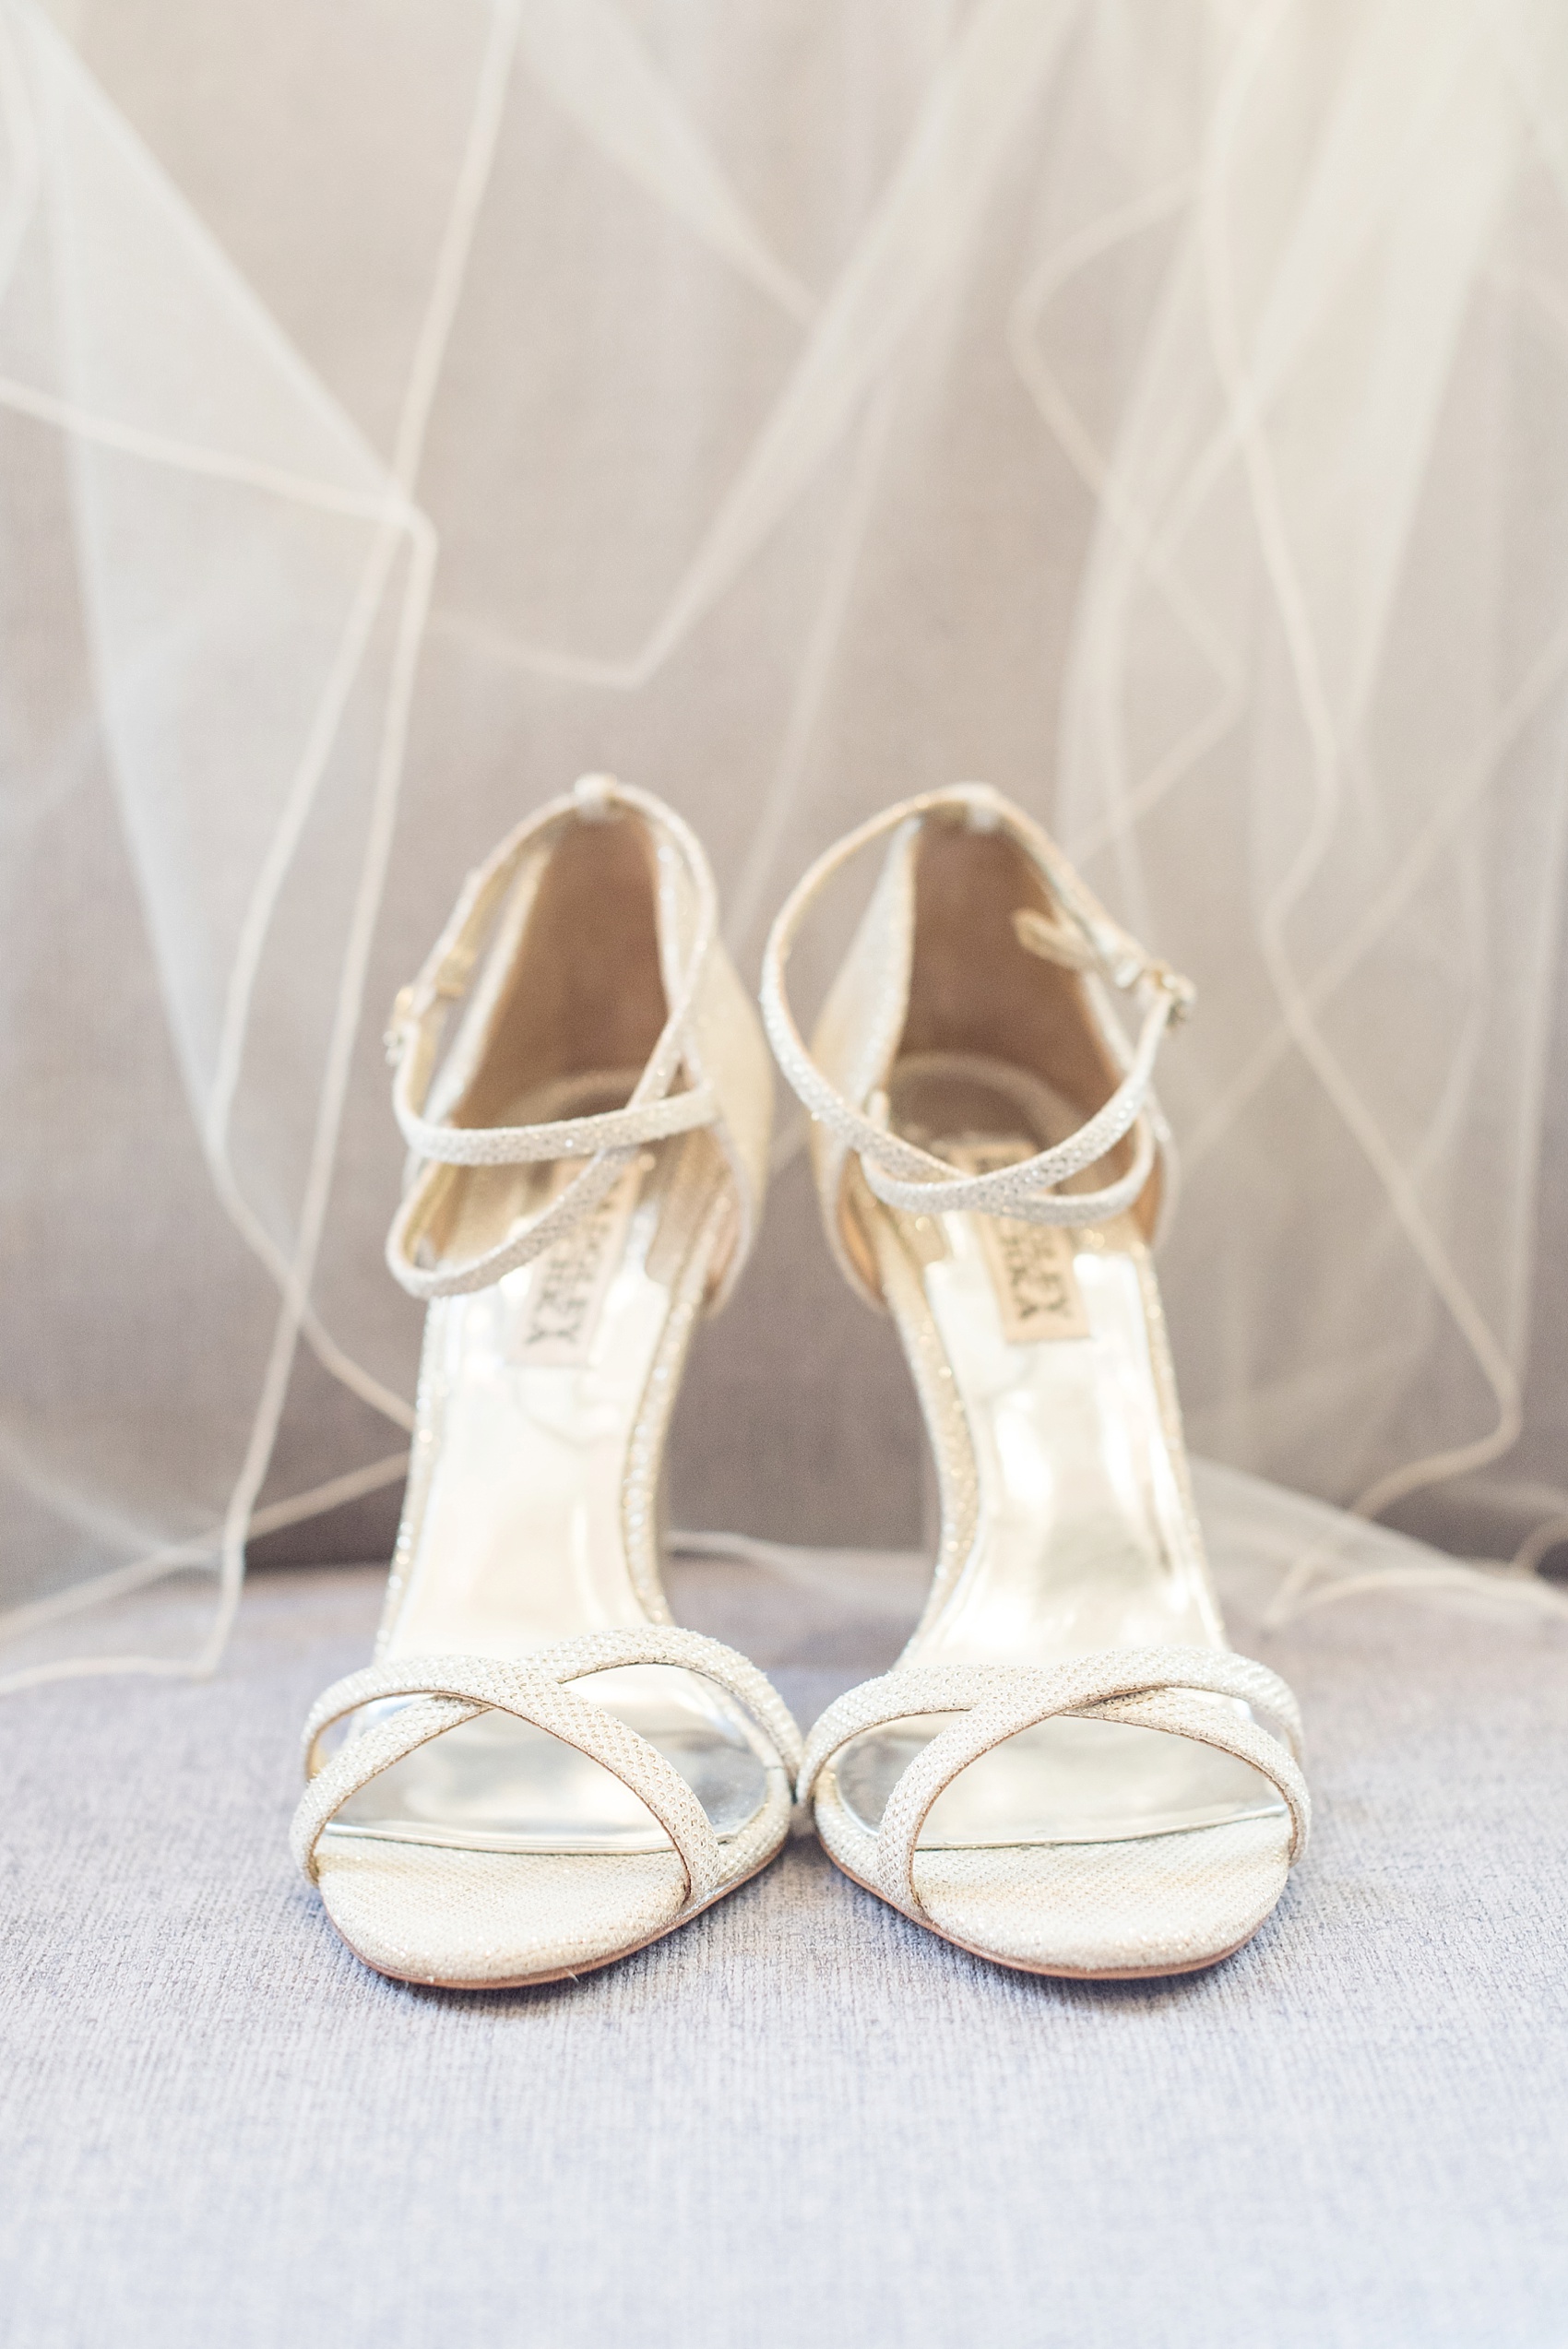 Connecticut Waveny House wedding photos by Mikkel Paige Photography. Strappy sparkle wedding day silver and gold heels.